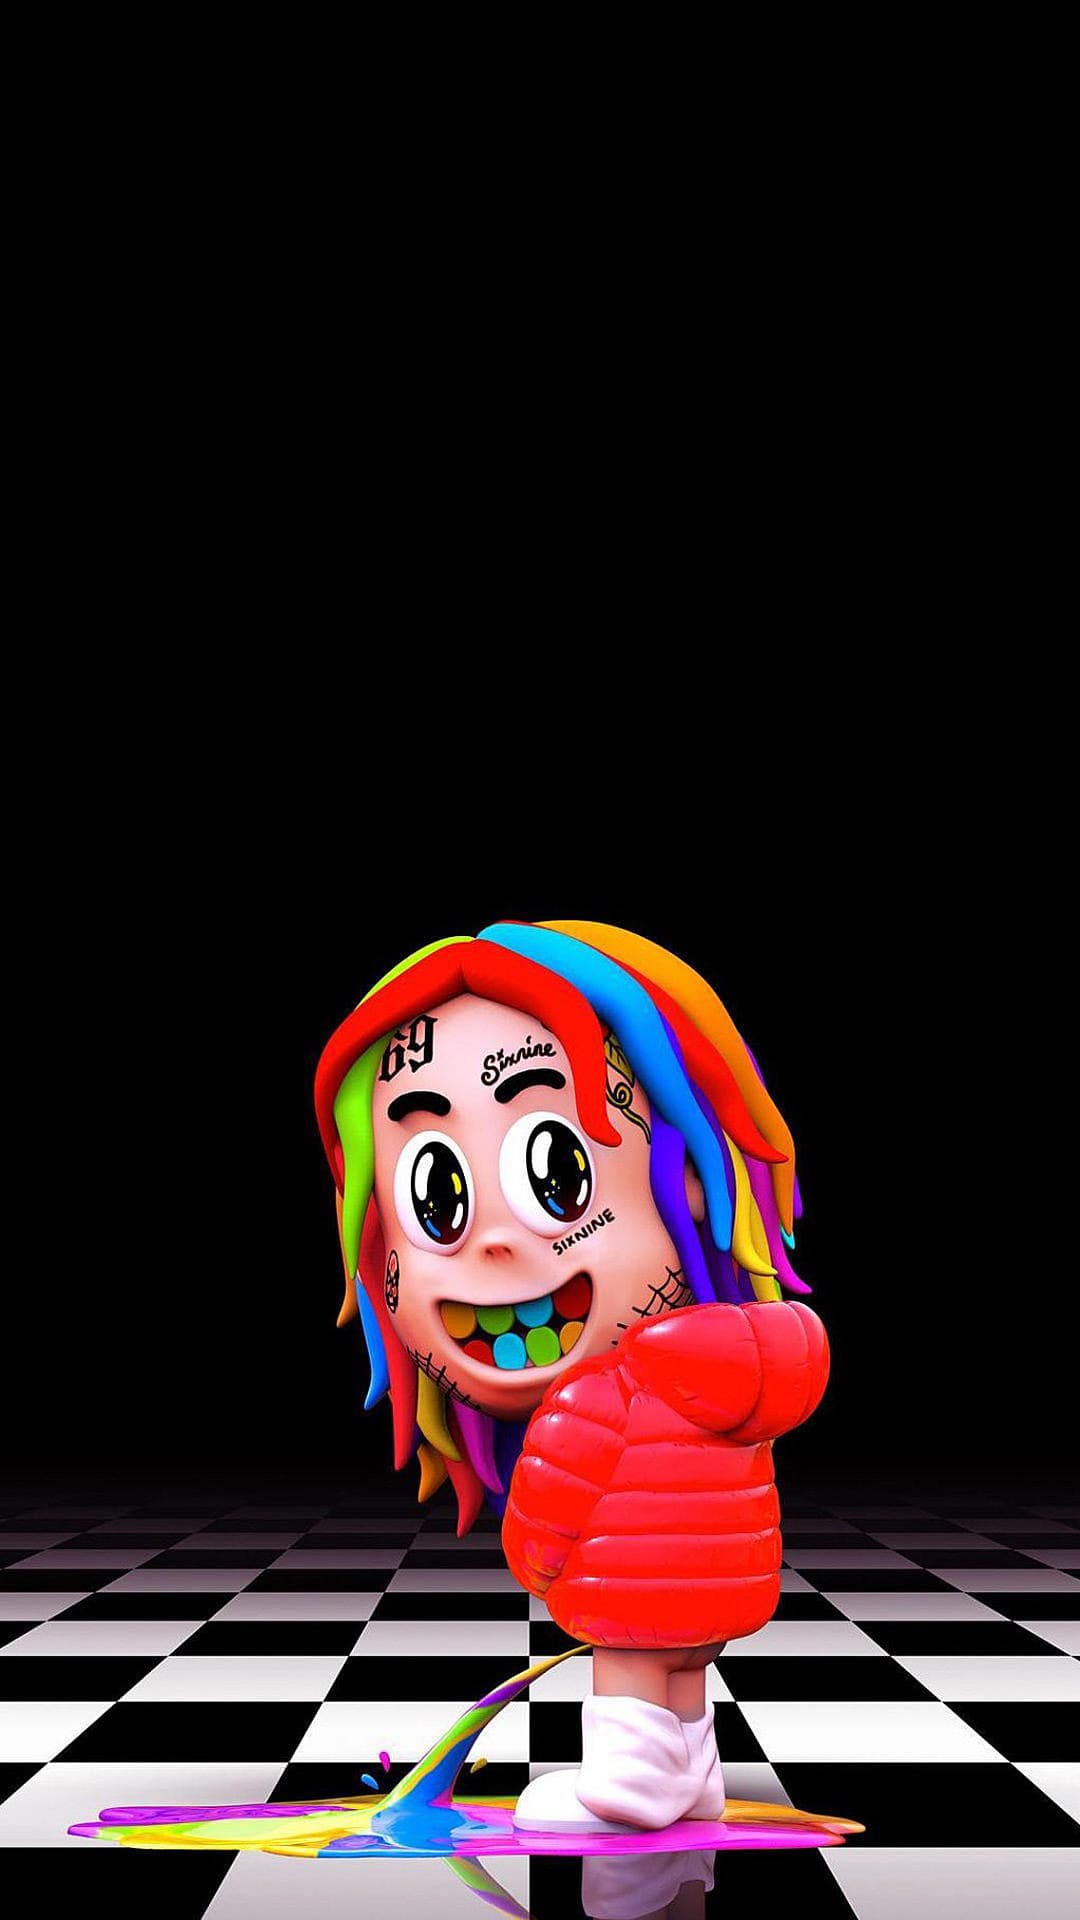 6ix9ine Iphone Wallpapers Kolpaper Awesome Free Hd Wallpapers